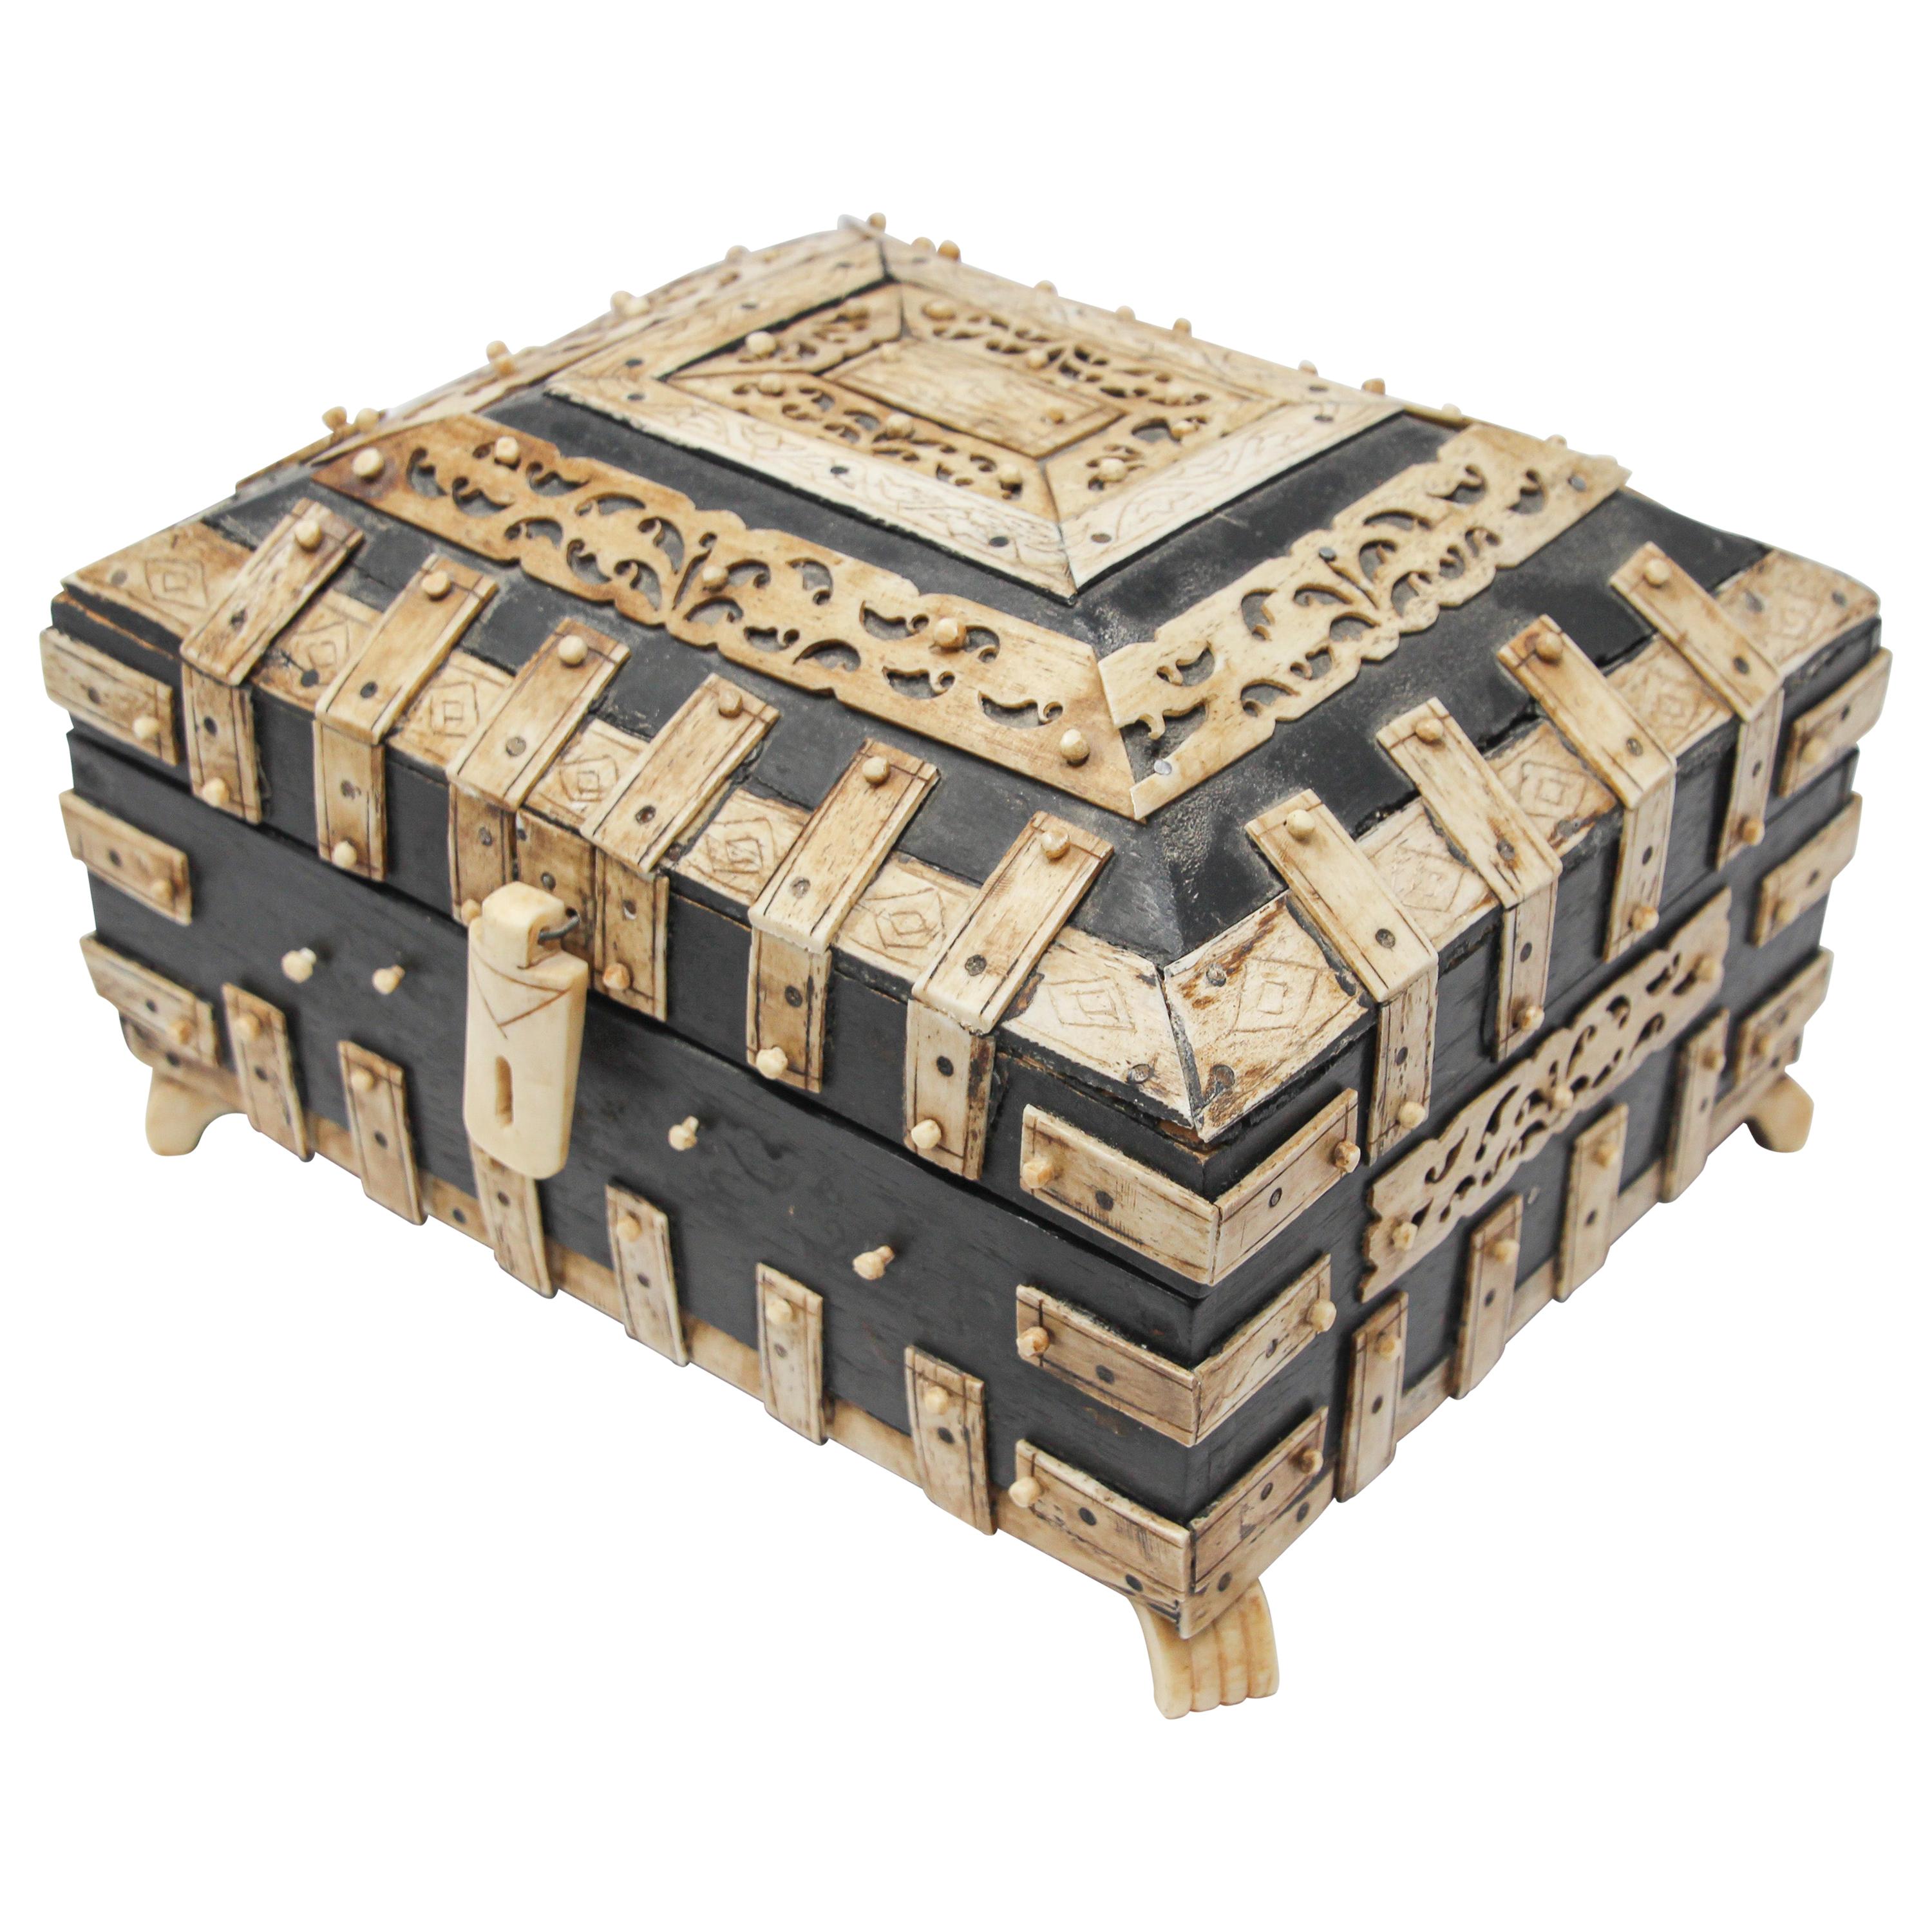 Decorative Anglo-Indian Overlay Footed Box